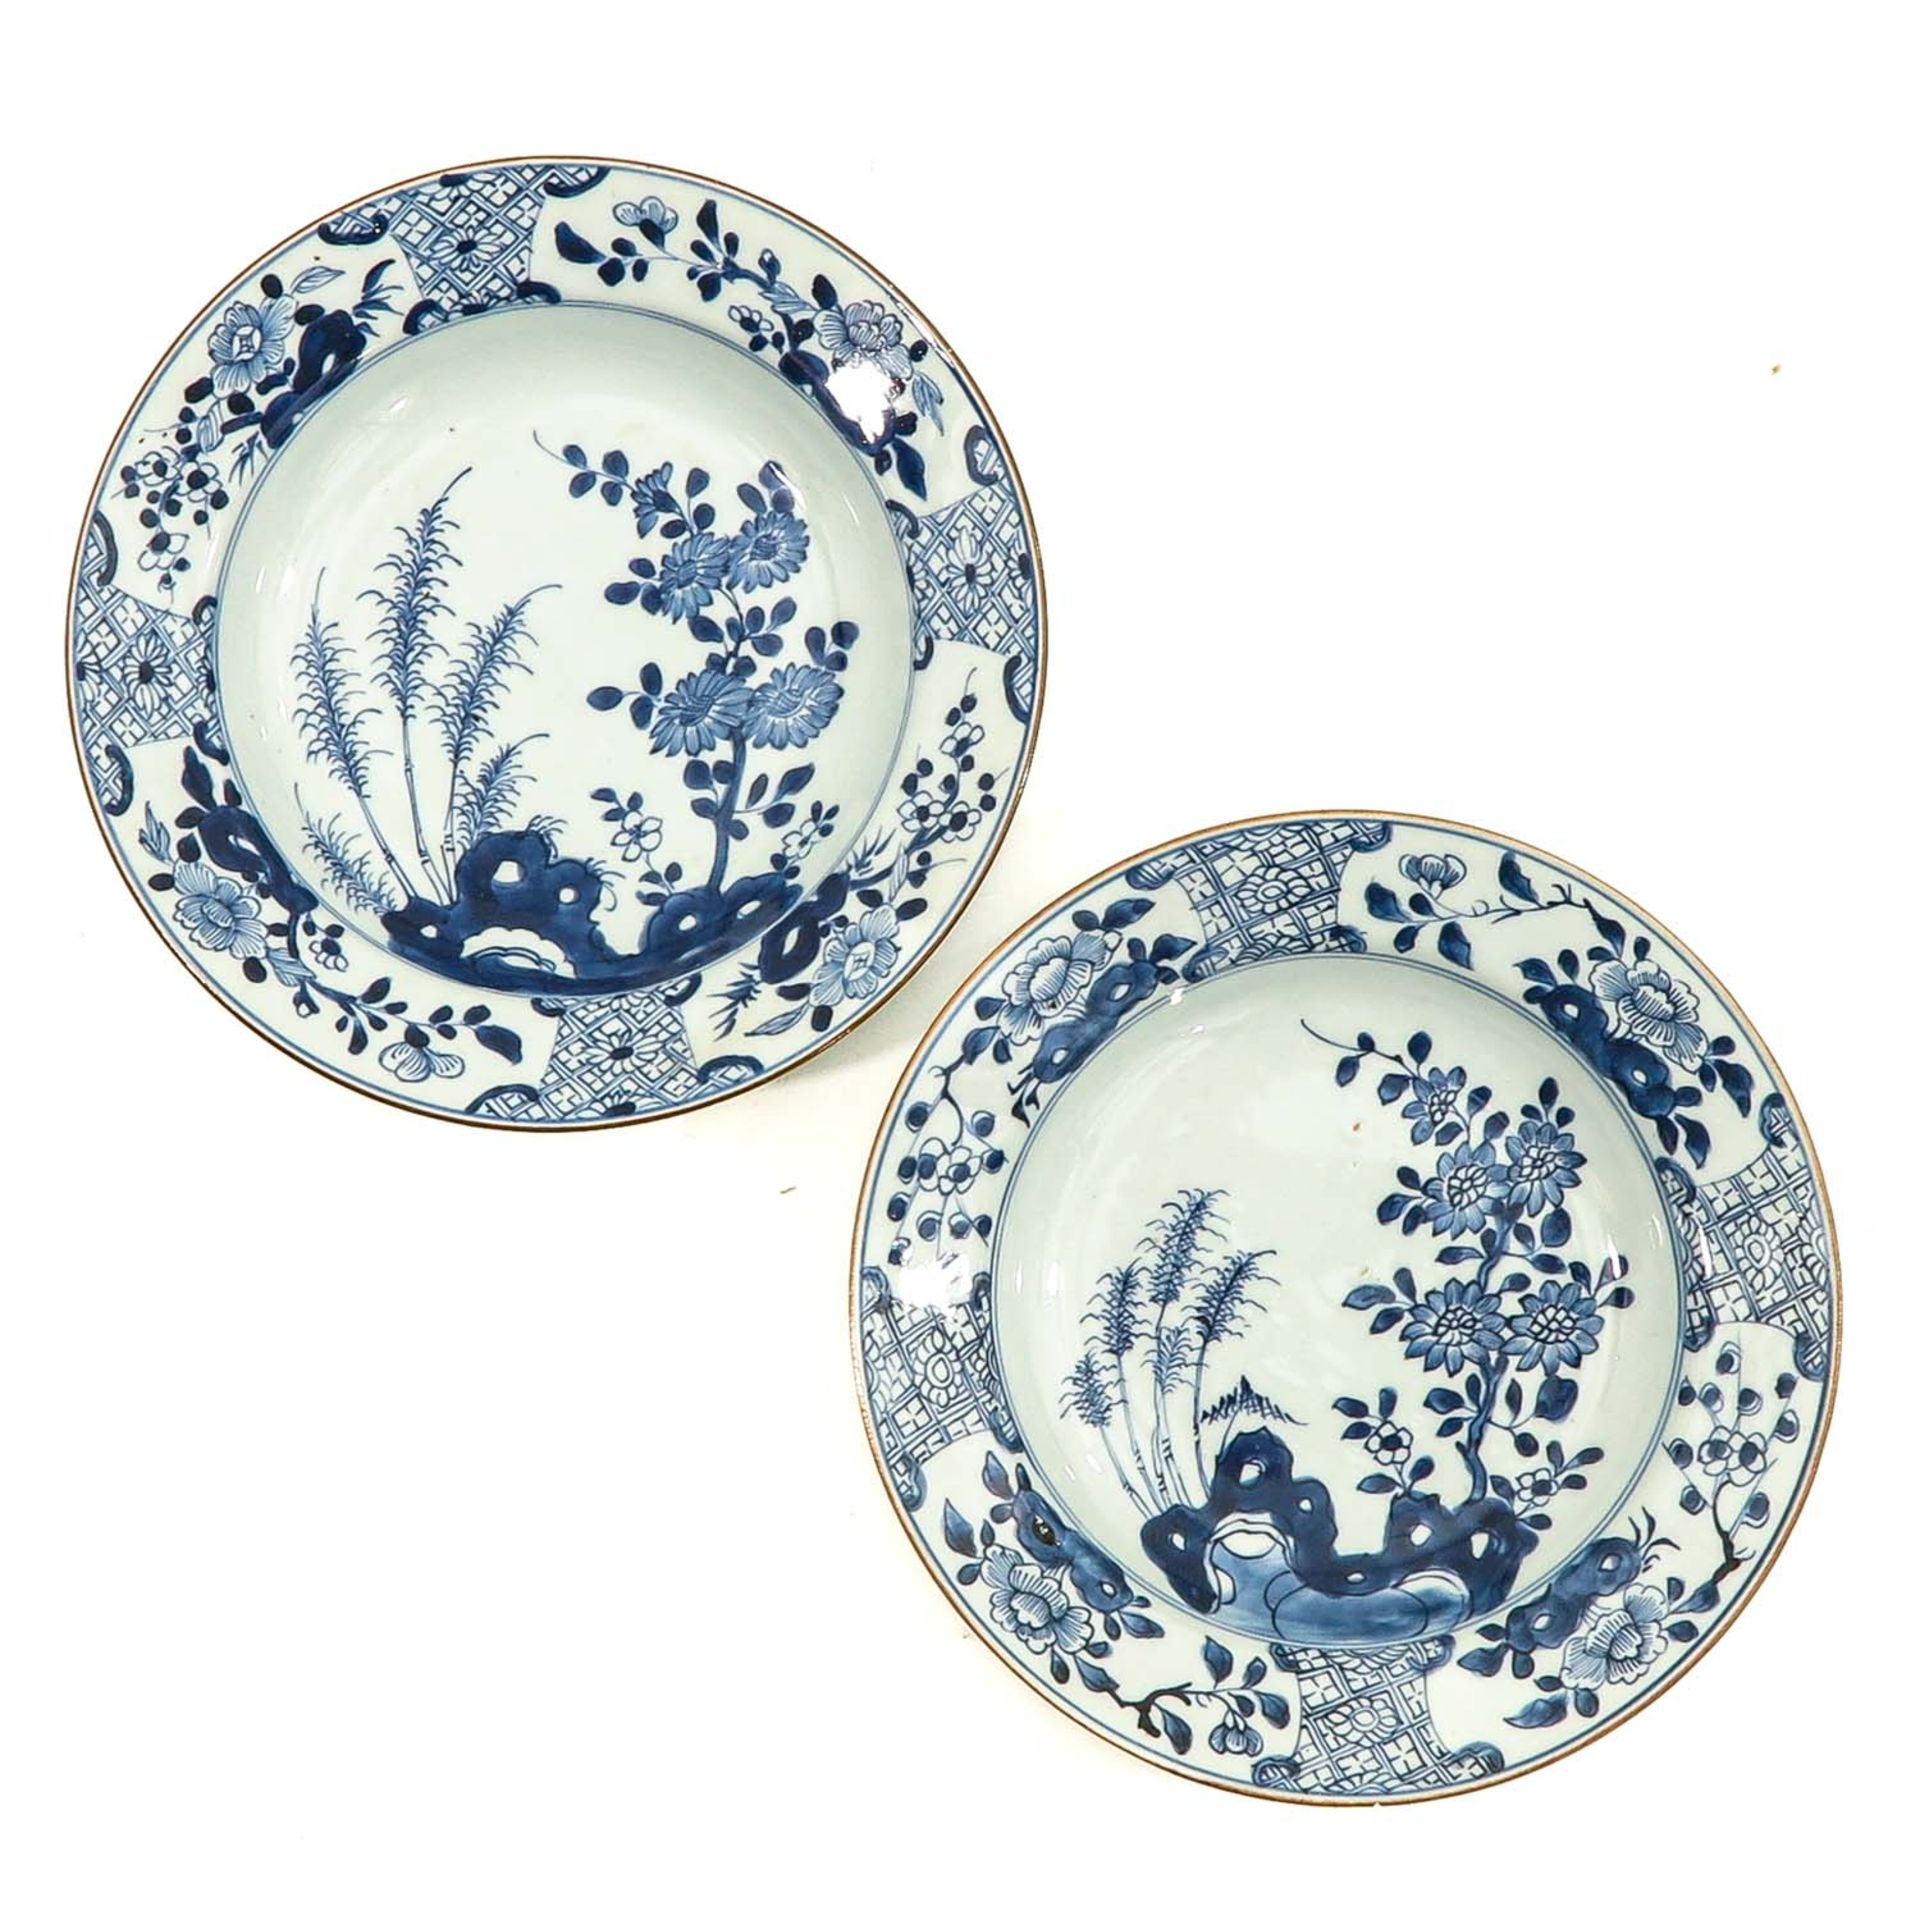 A Series of 4 Blue and White Plates - Image 5 of 9